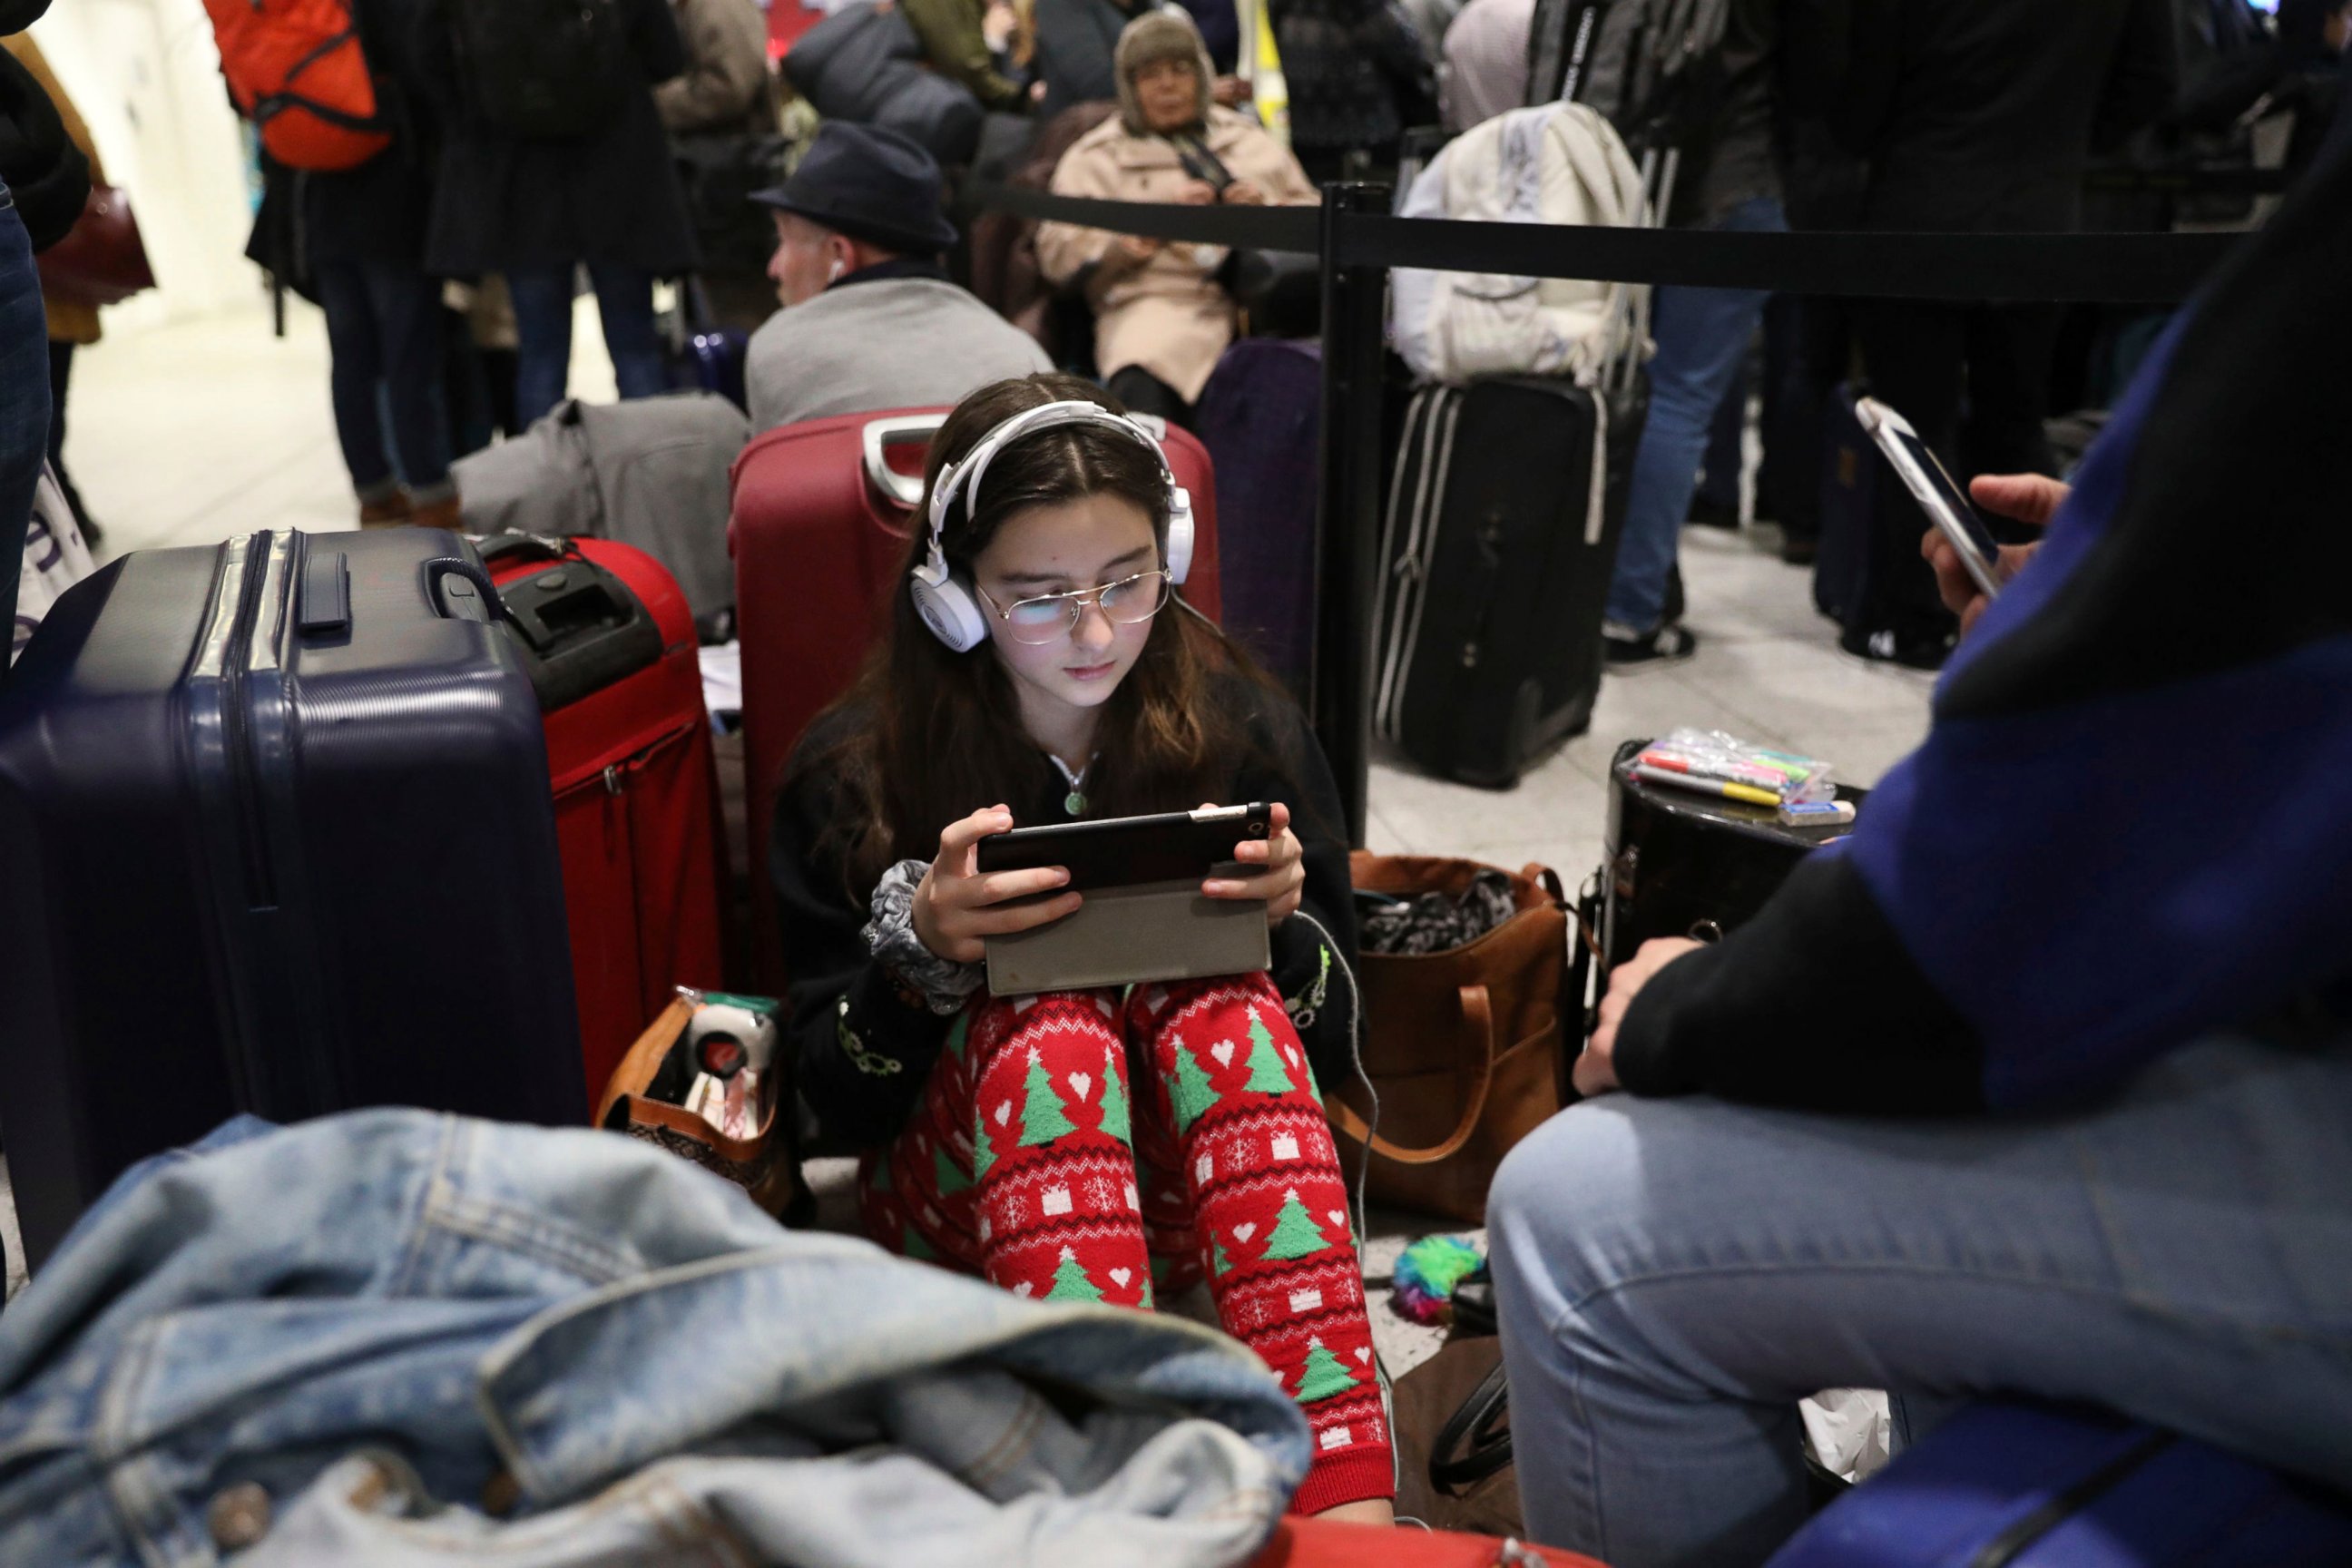 Passengers at Gatwick airport settle down to wait for their flights following the delays and cancellations brought on by drone sightings near the airfield, in London, Friday Dec. 21, 2018. New drone sightings Friday caused fresh chaos for holiday tra